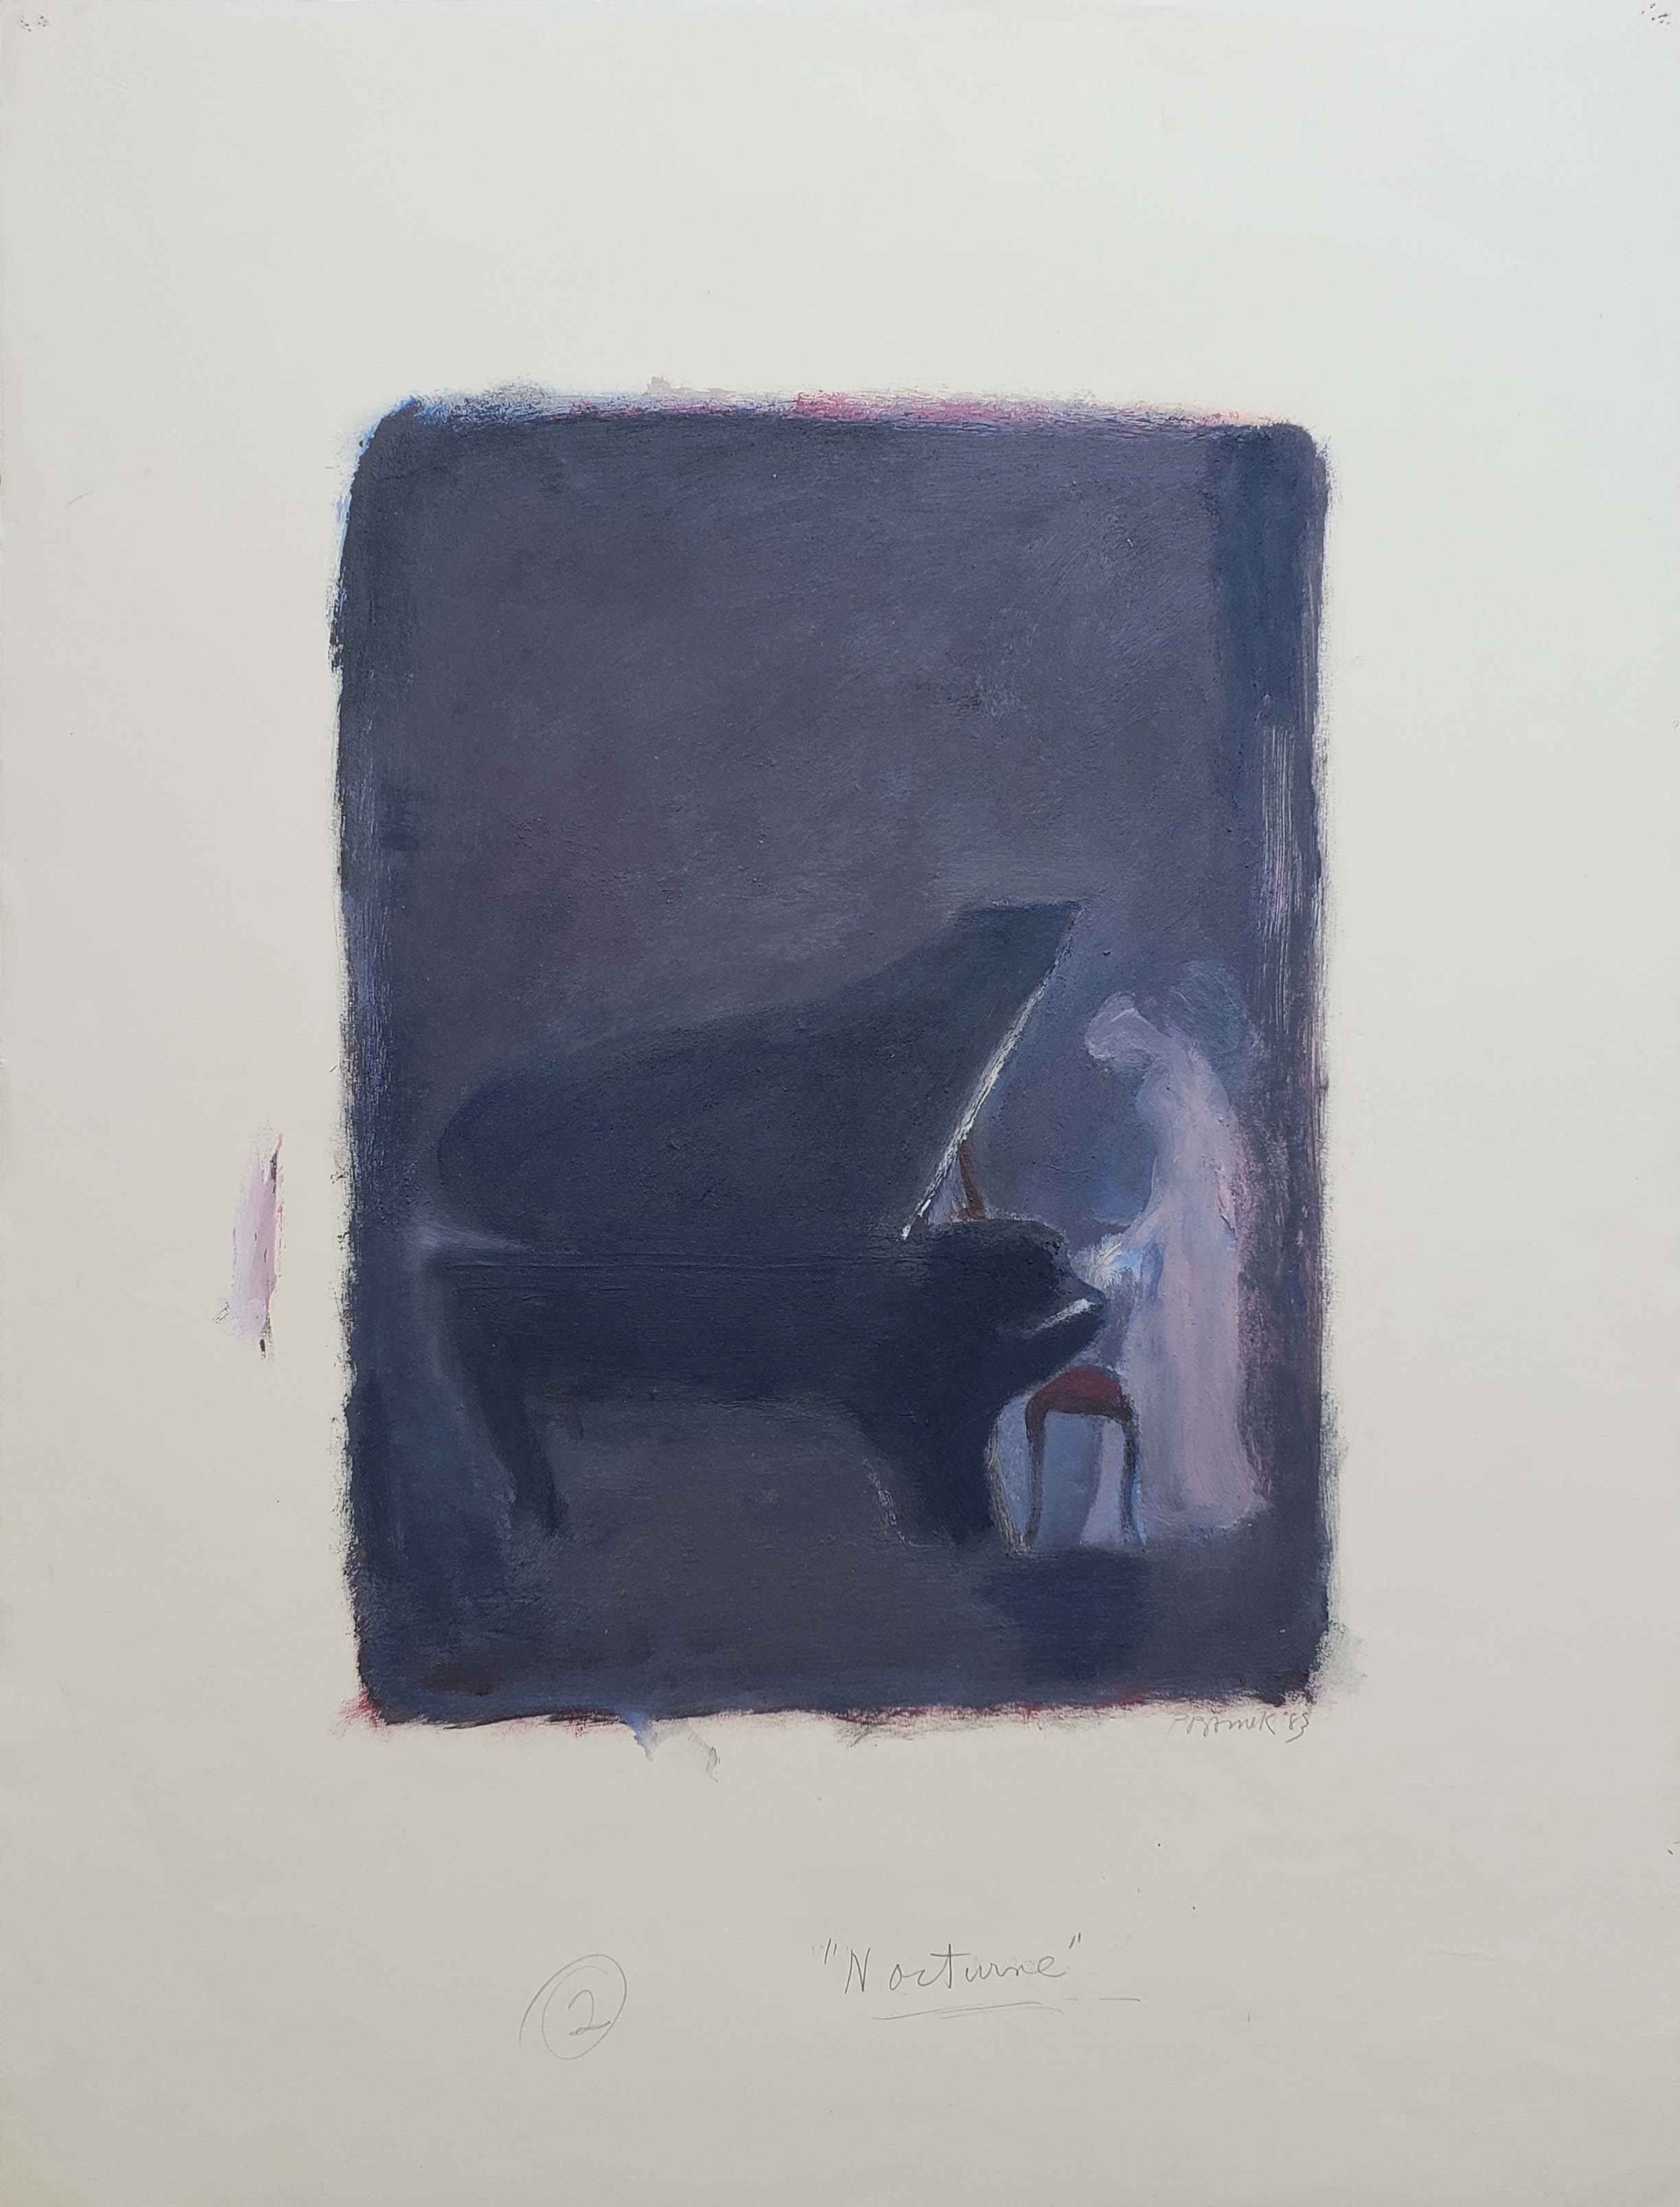 Edward Pramuk Figurative Painting - "Nocturne" 1983, Acrylic on Rives Paper, Abstract Pianist